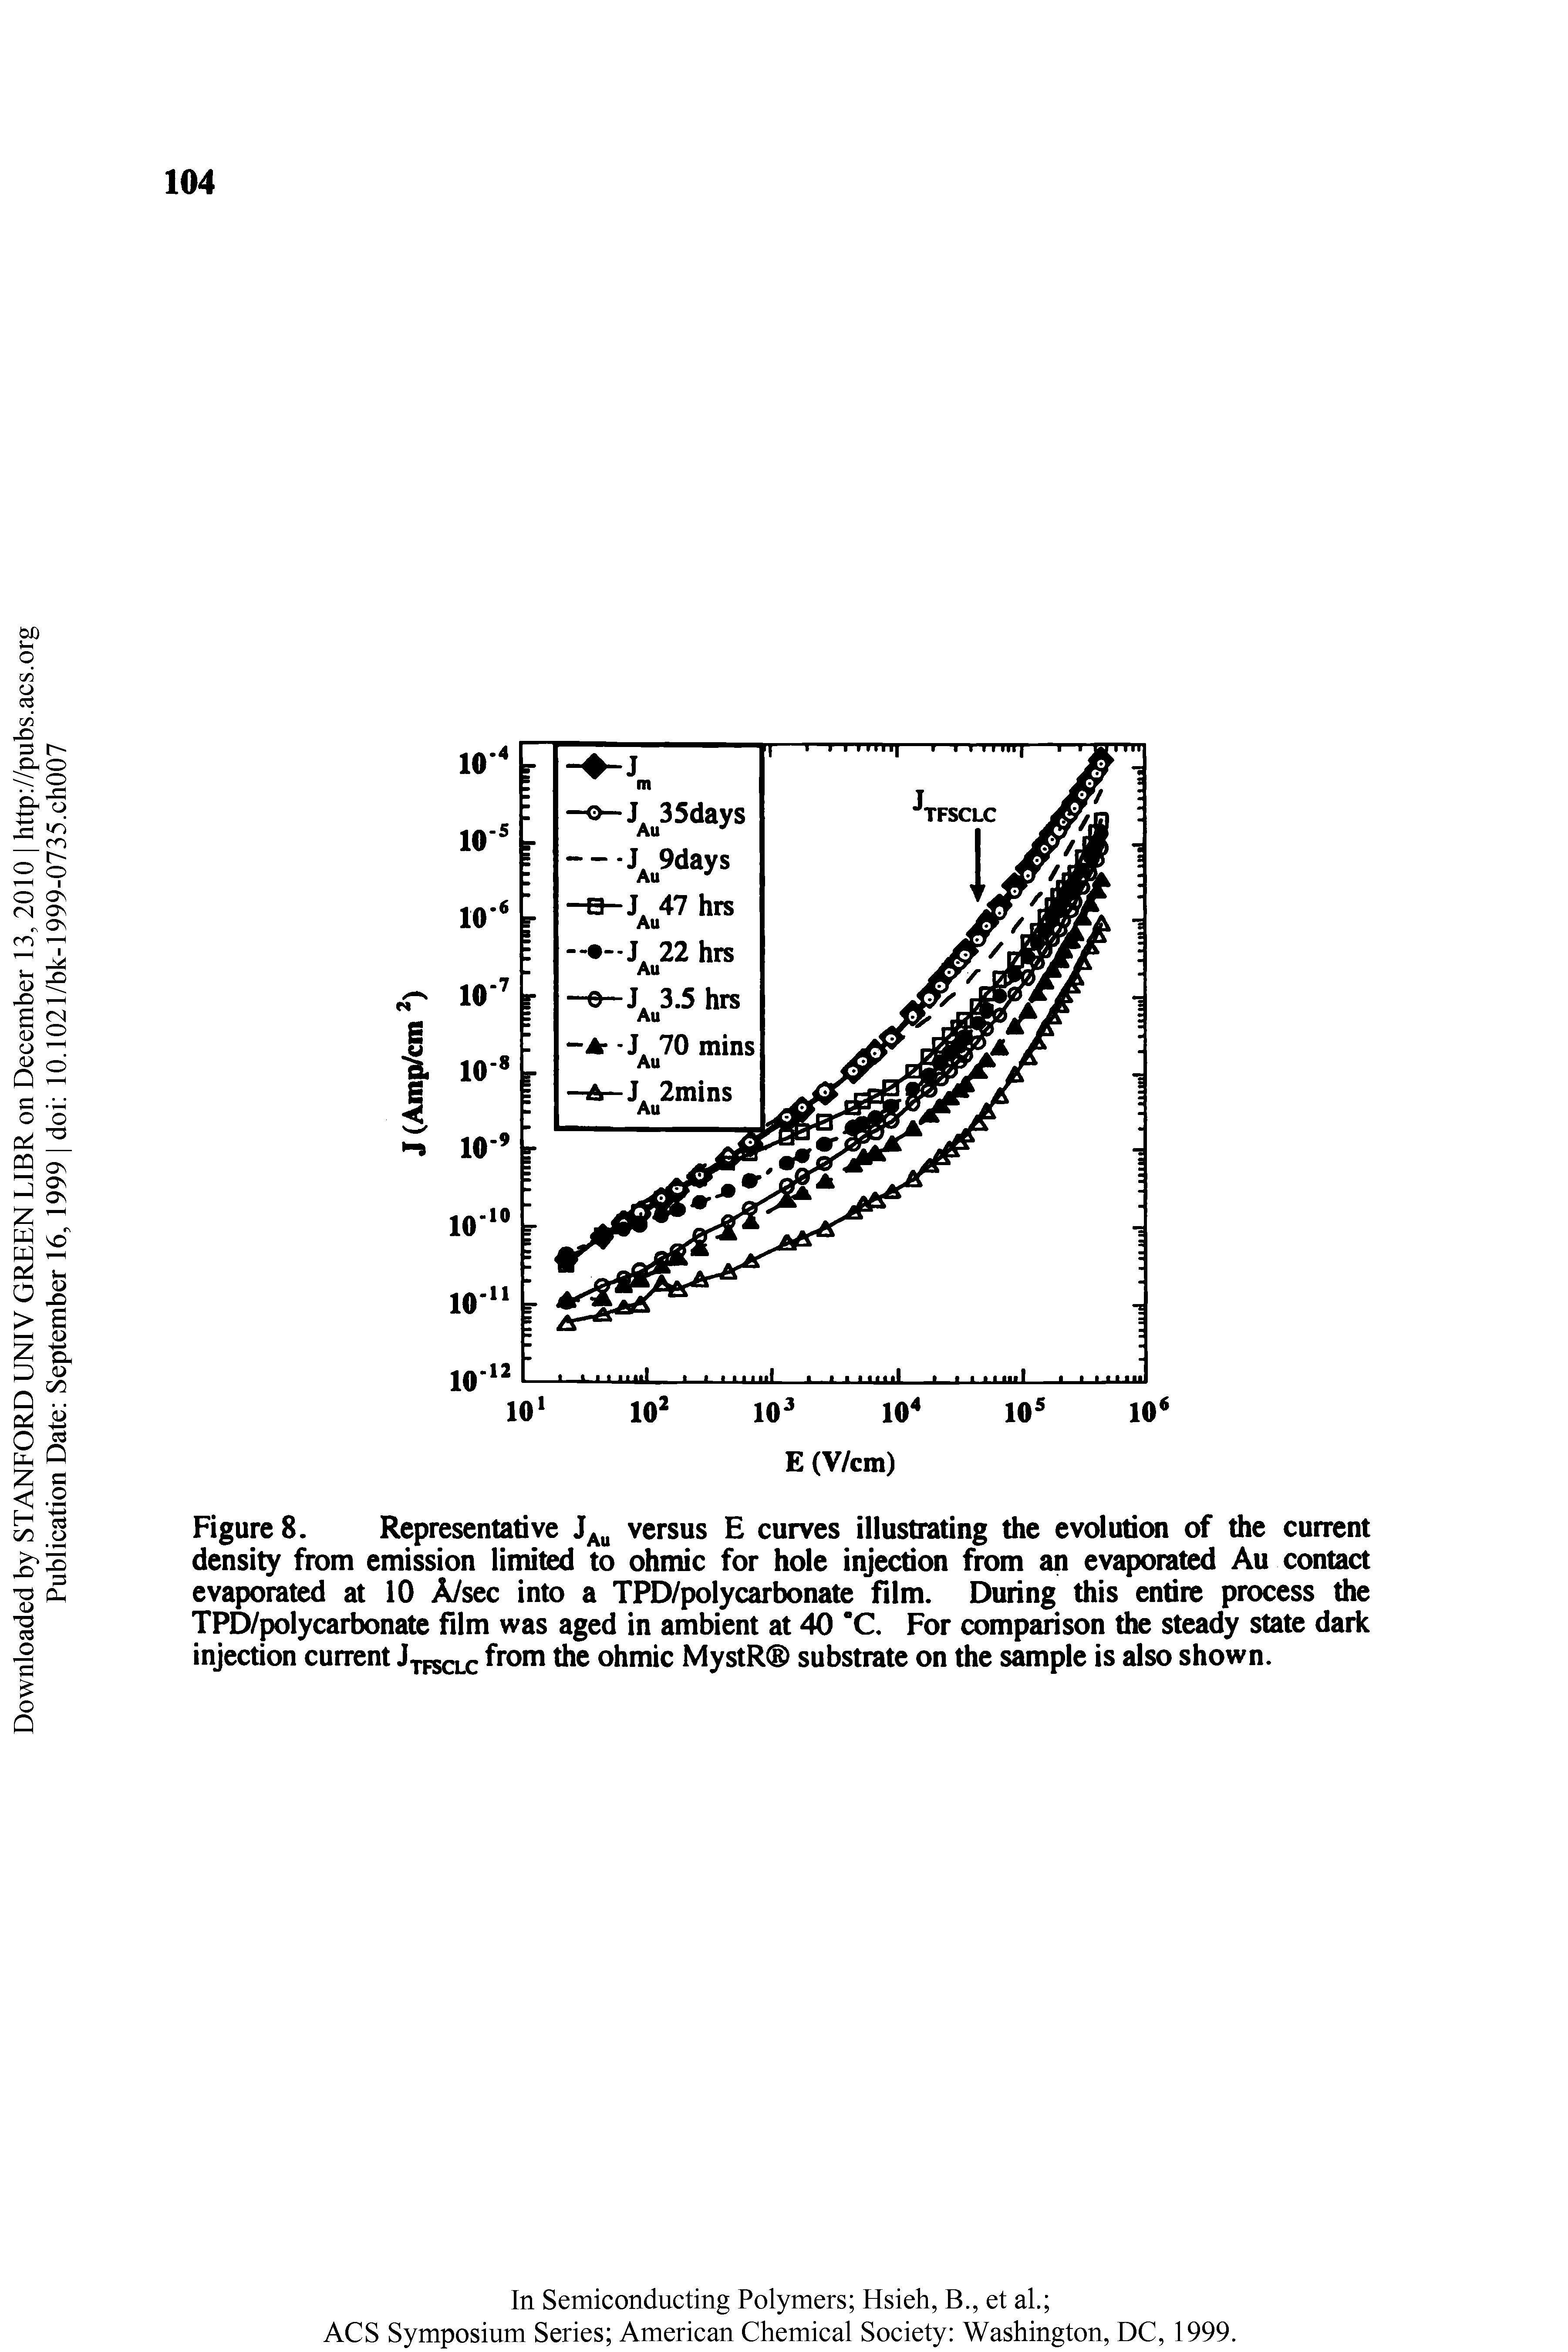 Figure 8. Representative versus E curves illustrating the evolution of the current density from emission limited to ohmic for hole injection from an evaporated Au contact evaporated at 10 A/sec into a TPD/polycarbonate film. During this entire process the TPD/polycarbonate film was aged in ambient at 40 "C, For comparison the steady state dark injection current Jtfsclc ohmic MystR substrate on the sample is also shown.